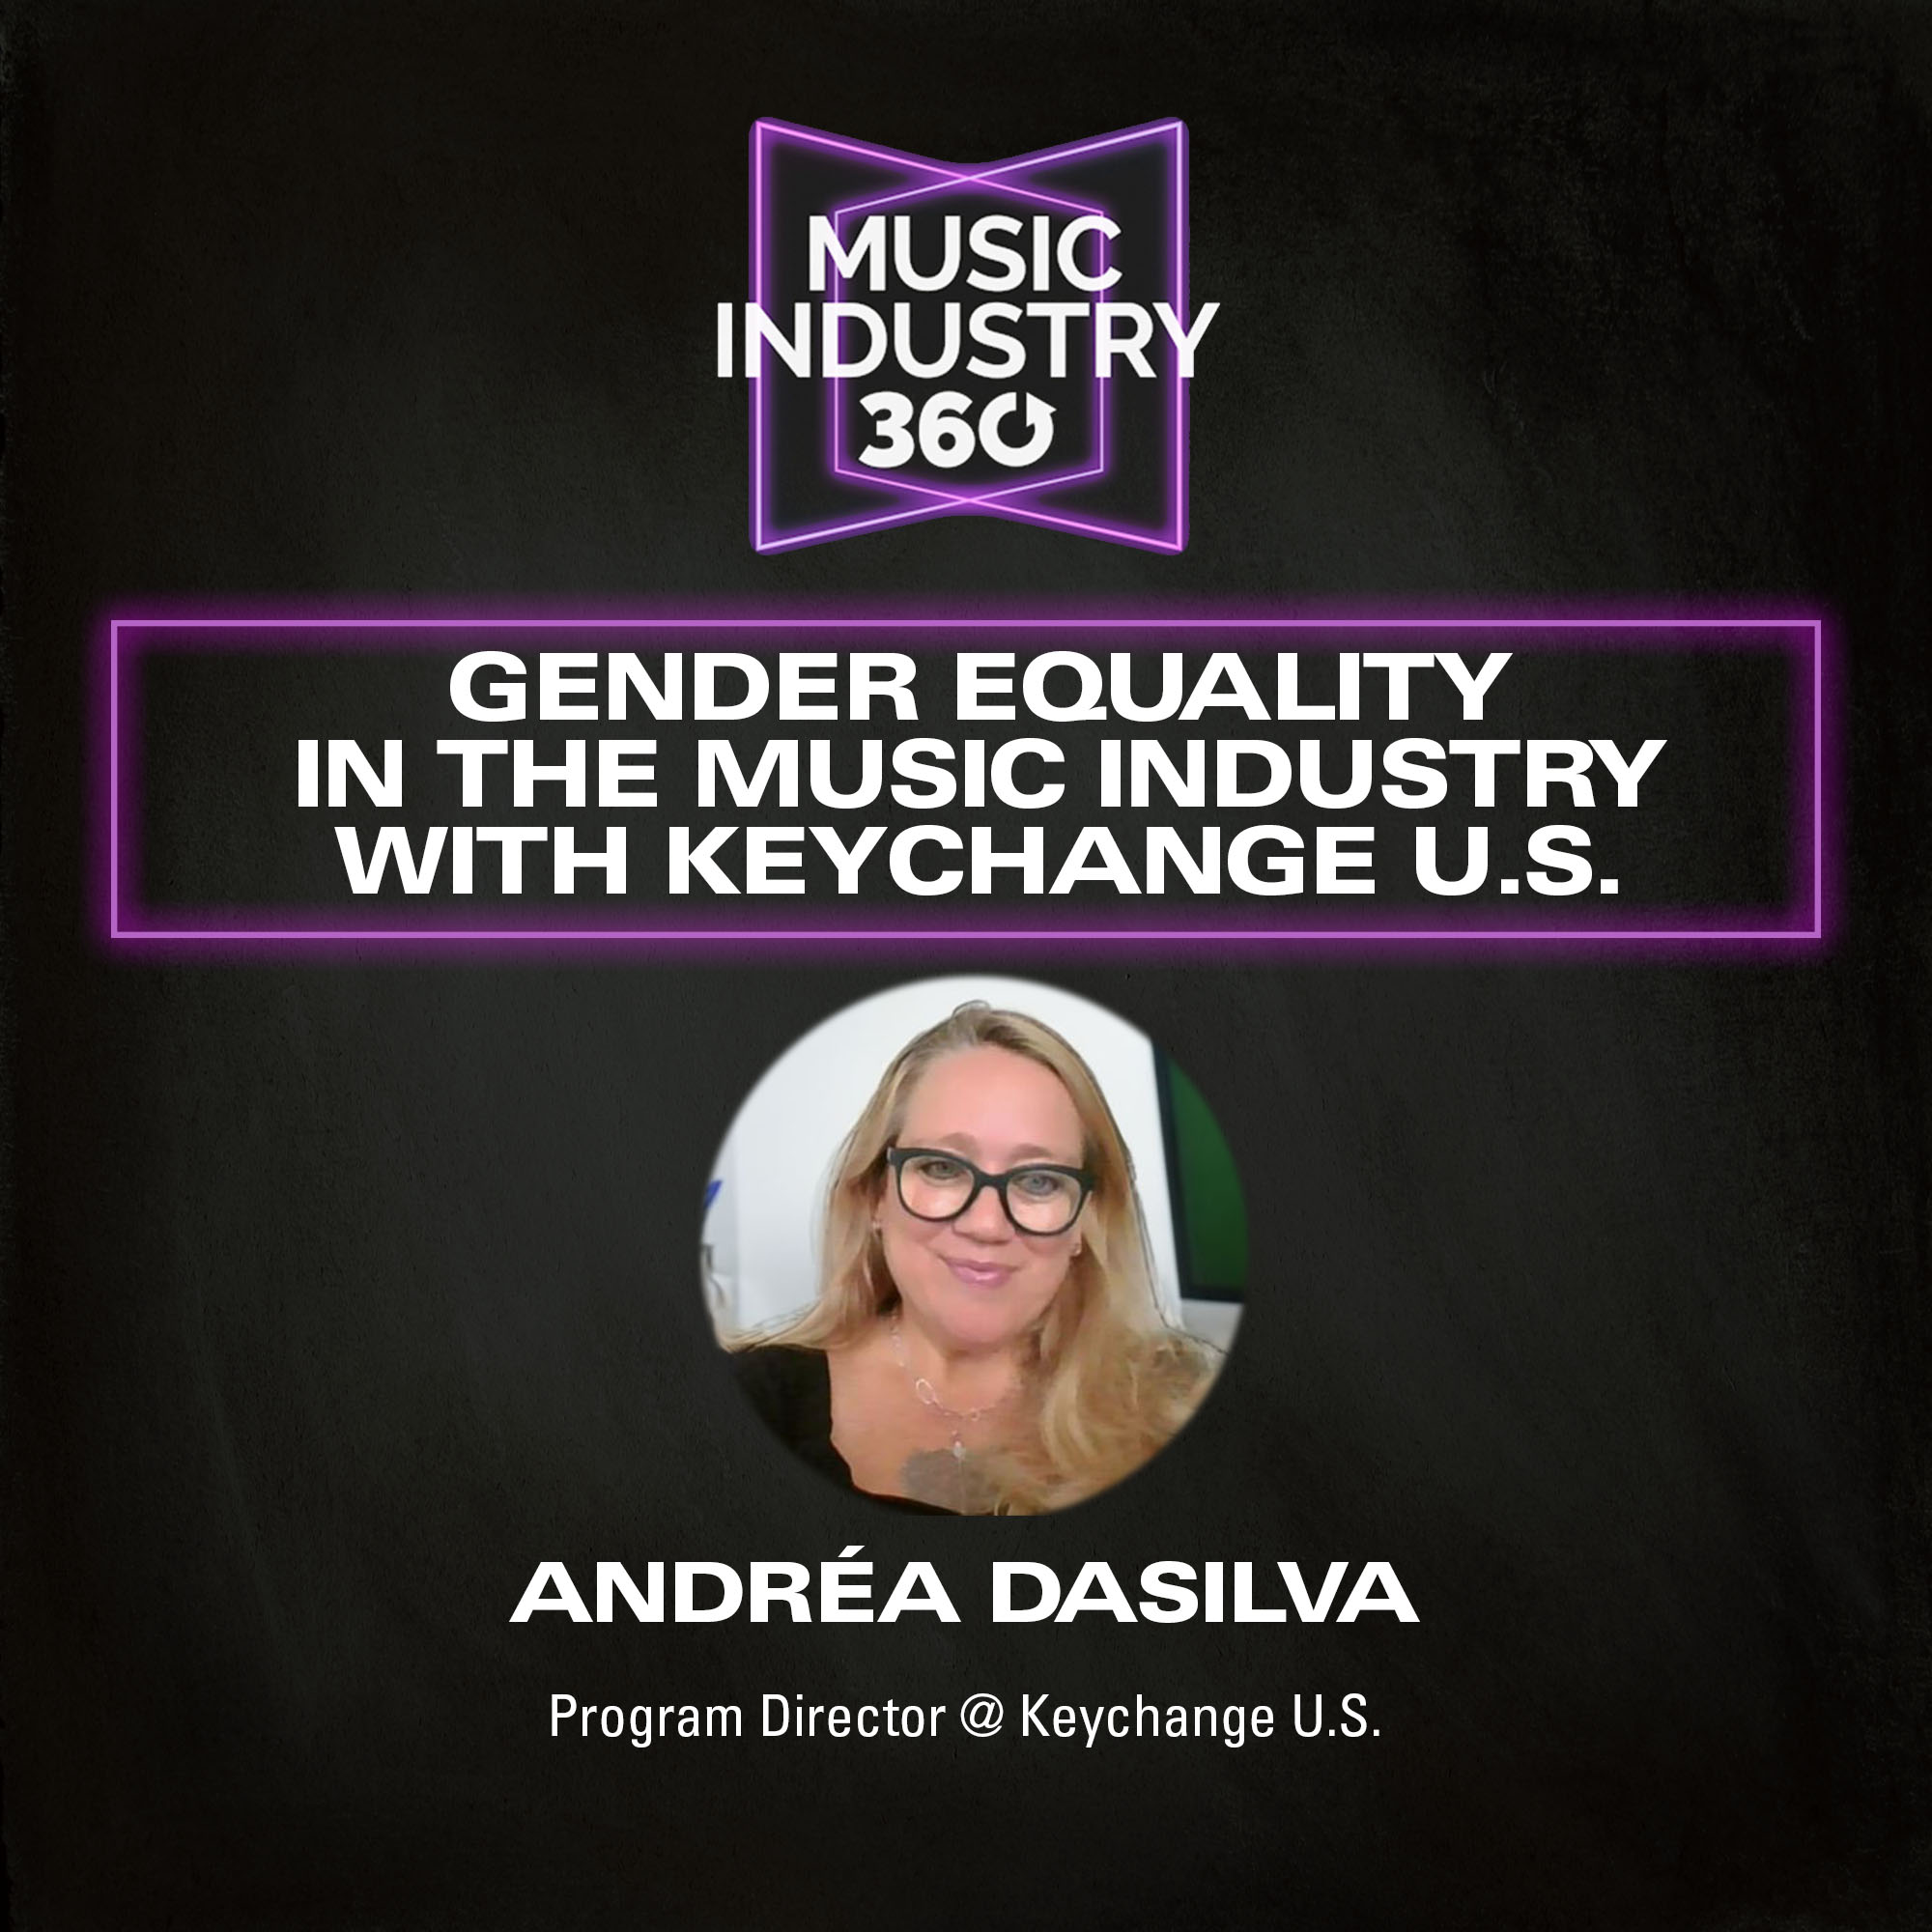 Gender Equality in The Music Industry with Keychange U.S. | Music Industry 360 Podcast